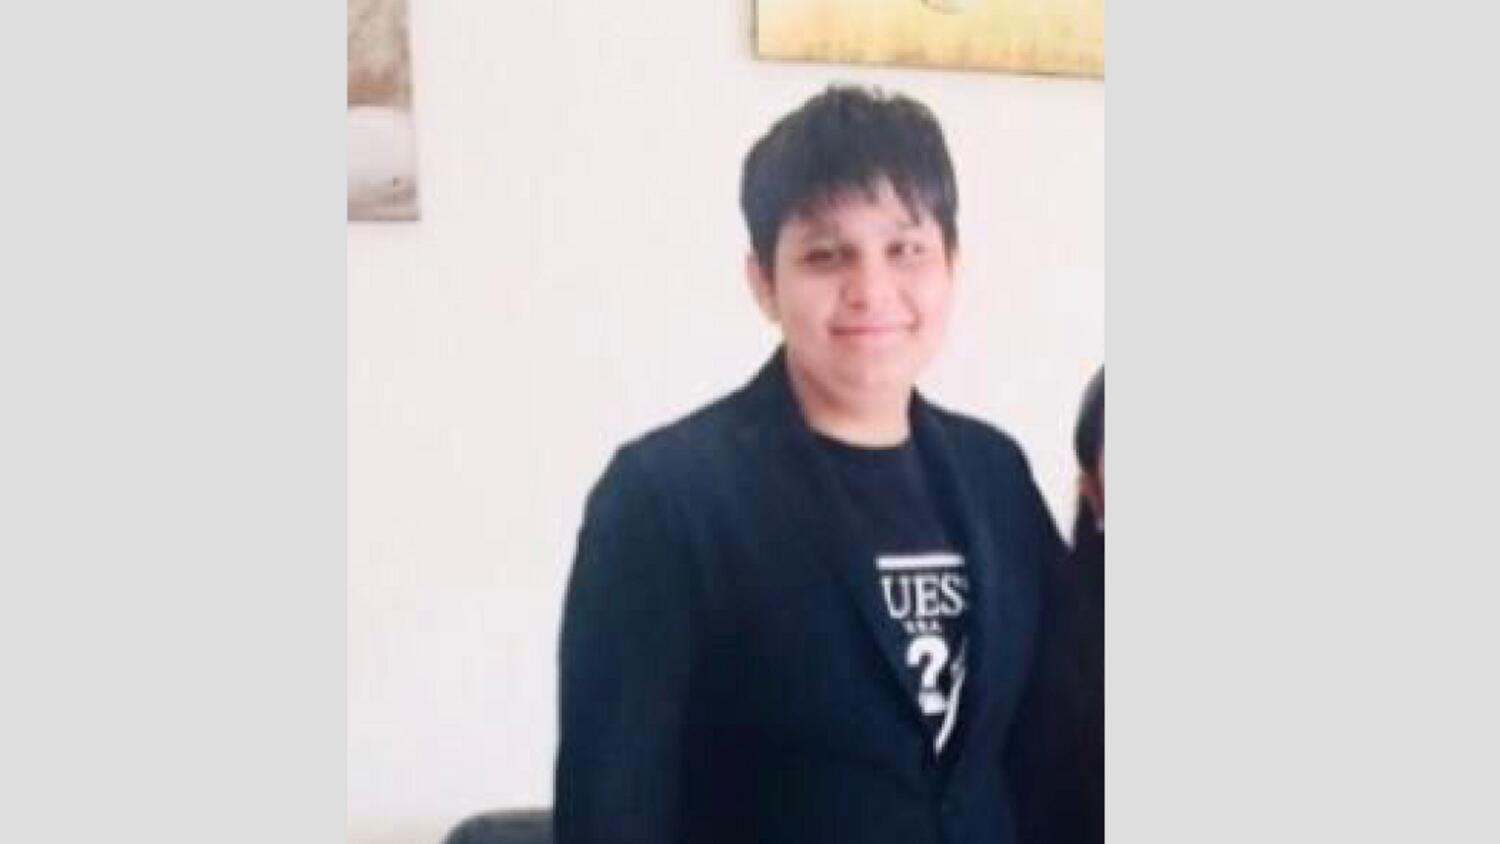 UAE: Parents of missing Indian teen, aged 15, issue urgent appeal to find him